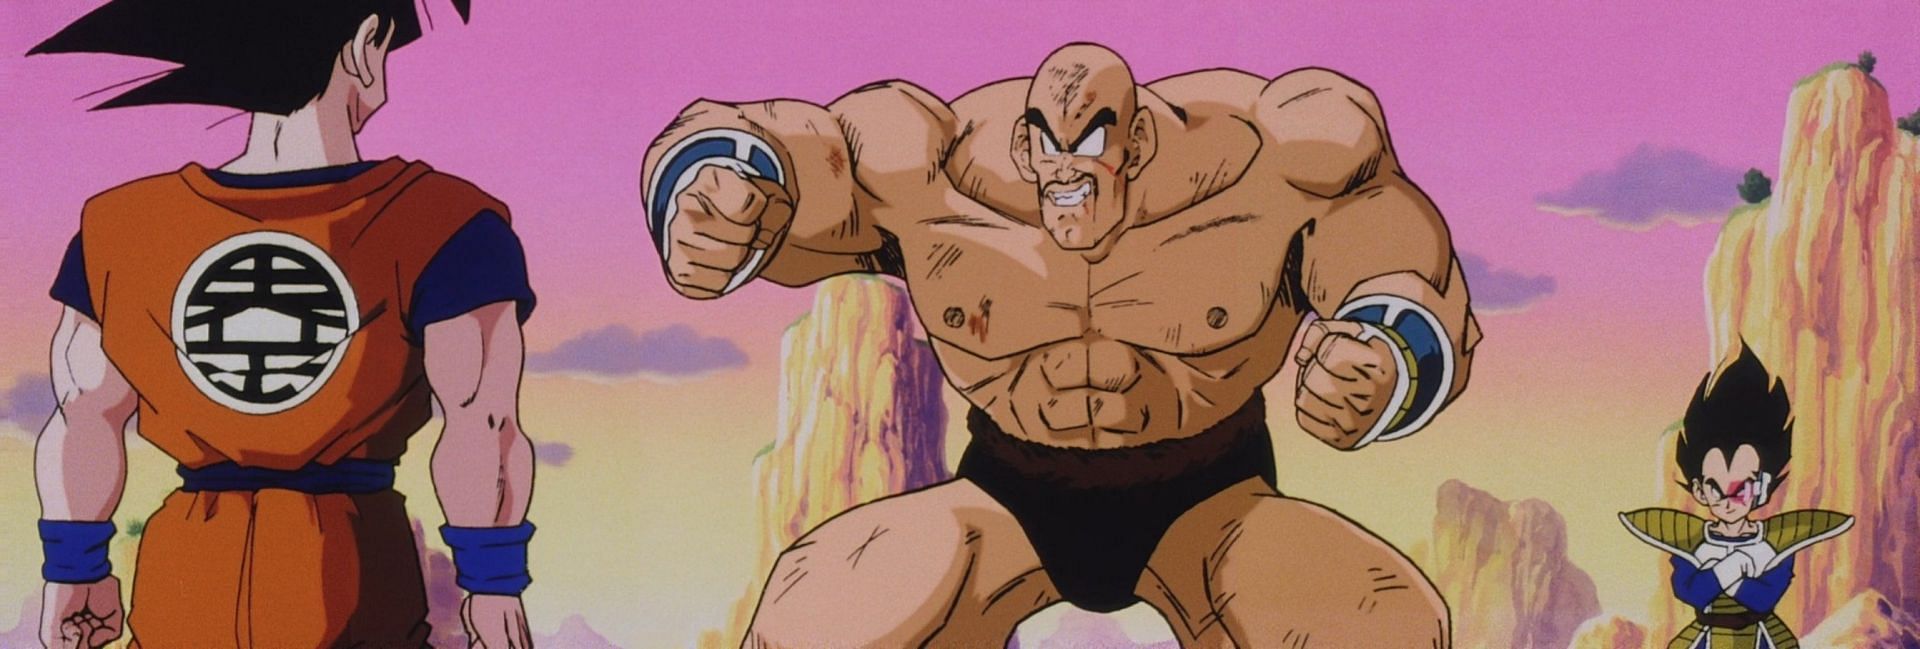 Nappa as seen in the anime series (Image via Toei Animation)